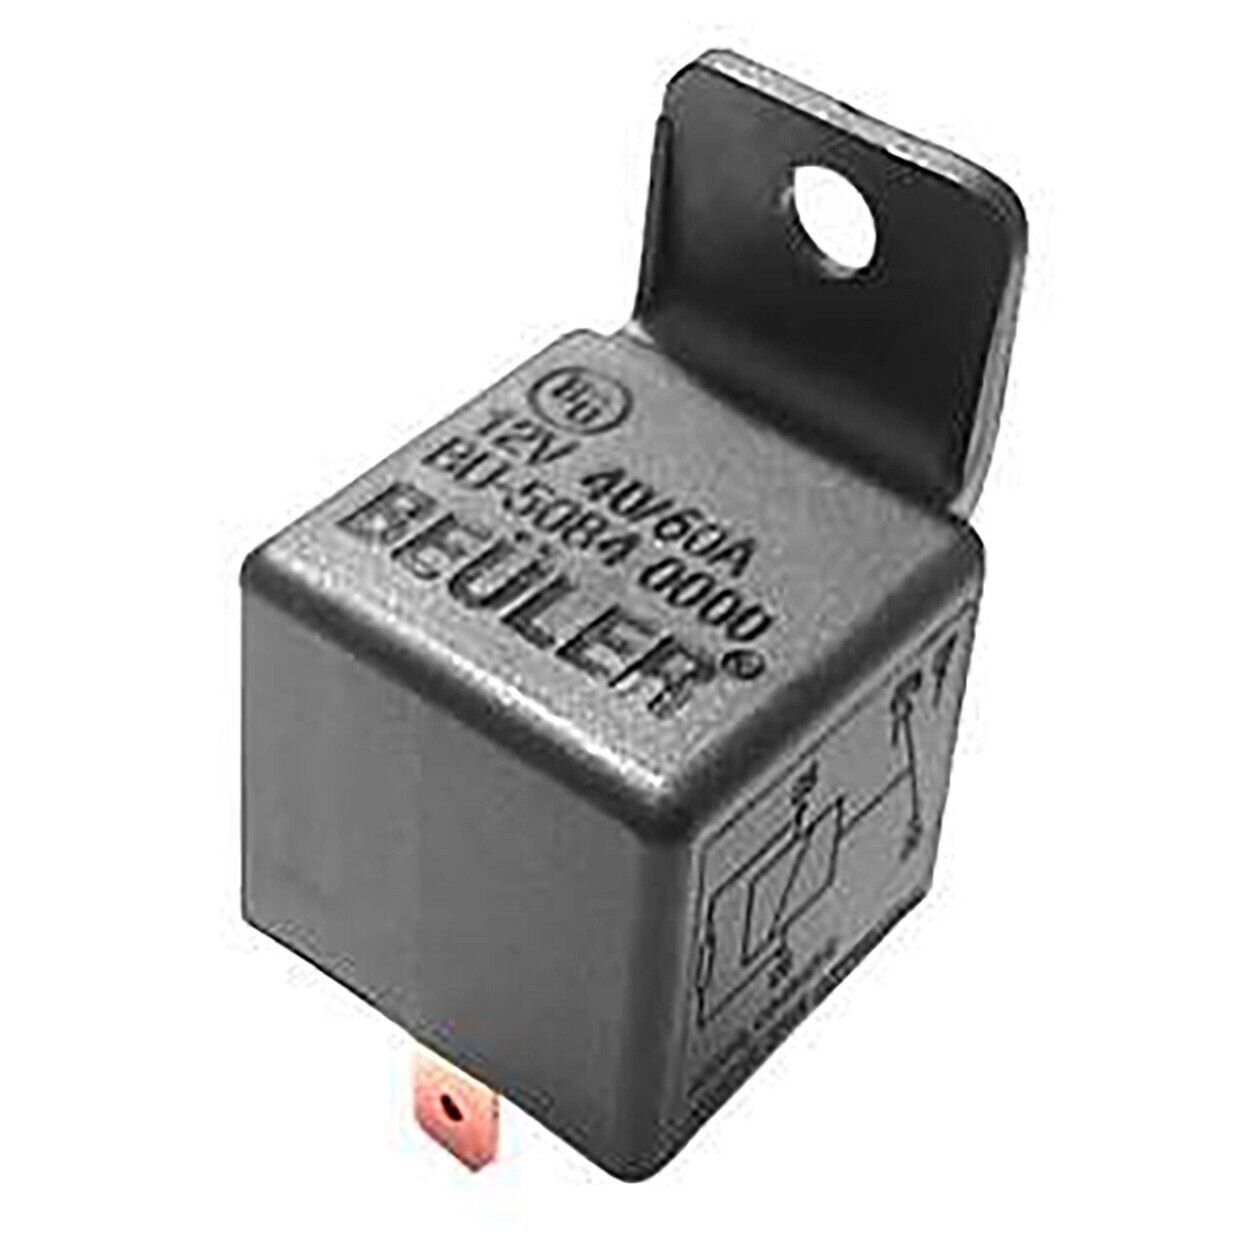 Automotive Universal 12 VDC Vehicle 5-Pin Relay SPDT 40/60A Metal tab - 10 Pack